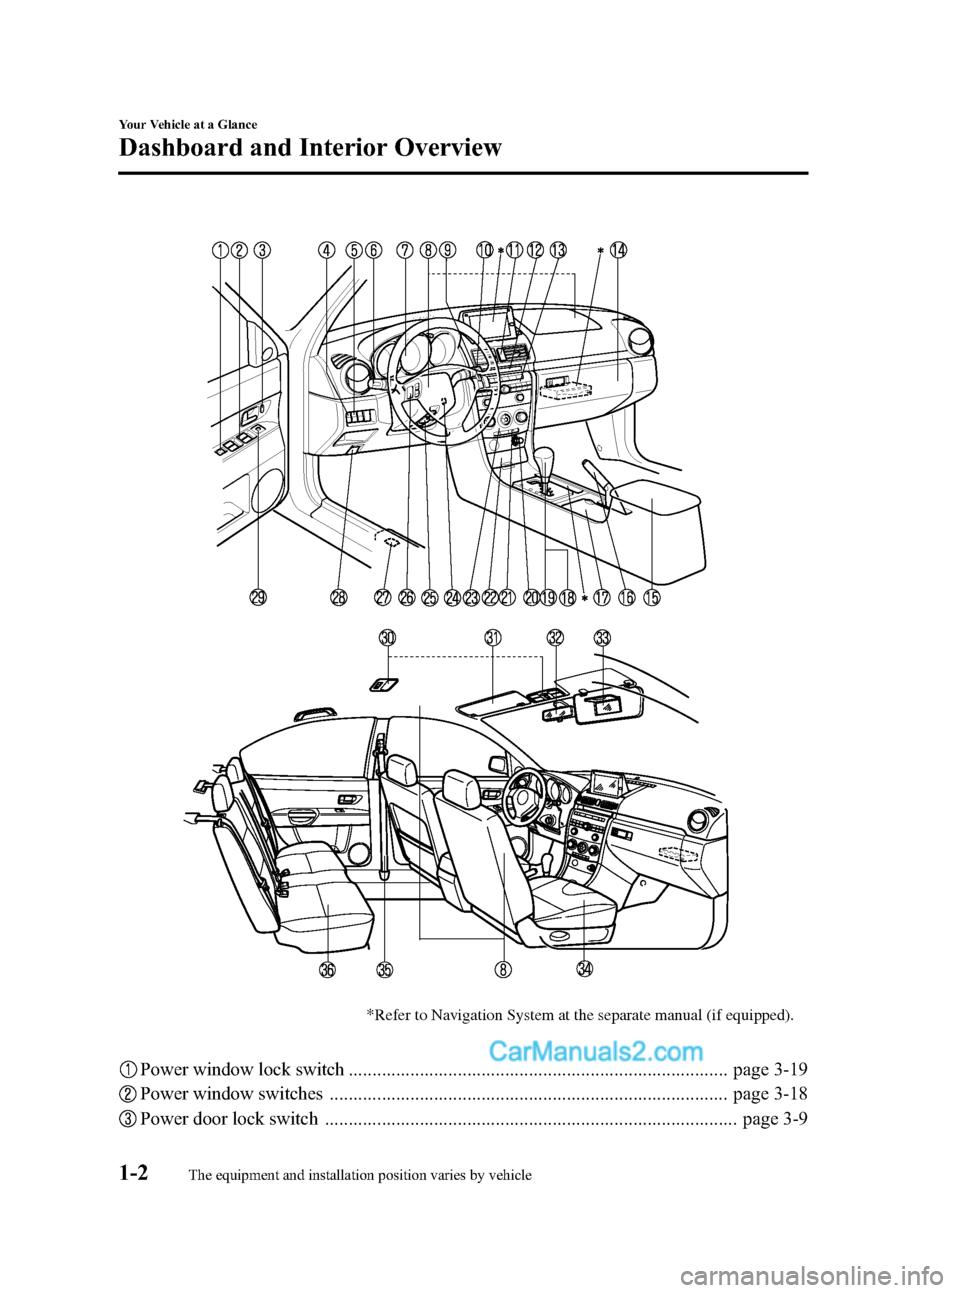 MAZDA MODEL MAZDASPEED 3 2008  Owners Manual (in English) Black plate (8,1)
*Refer to Navigation System at the separate manual (if equipped).
Power window lock switch ................................................................................ page 3-19
